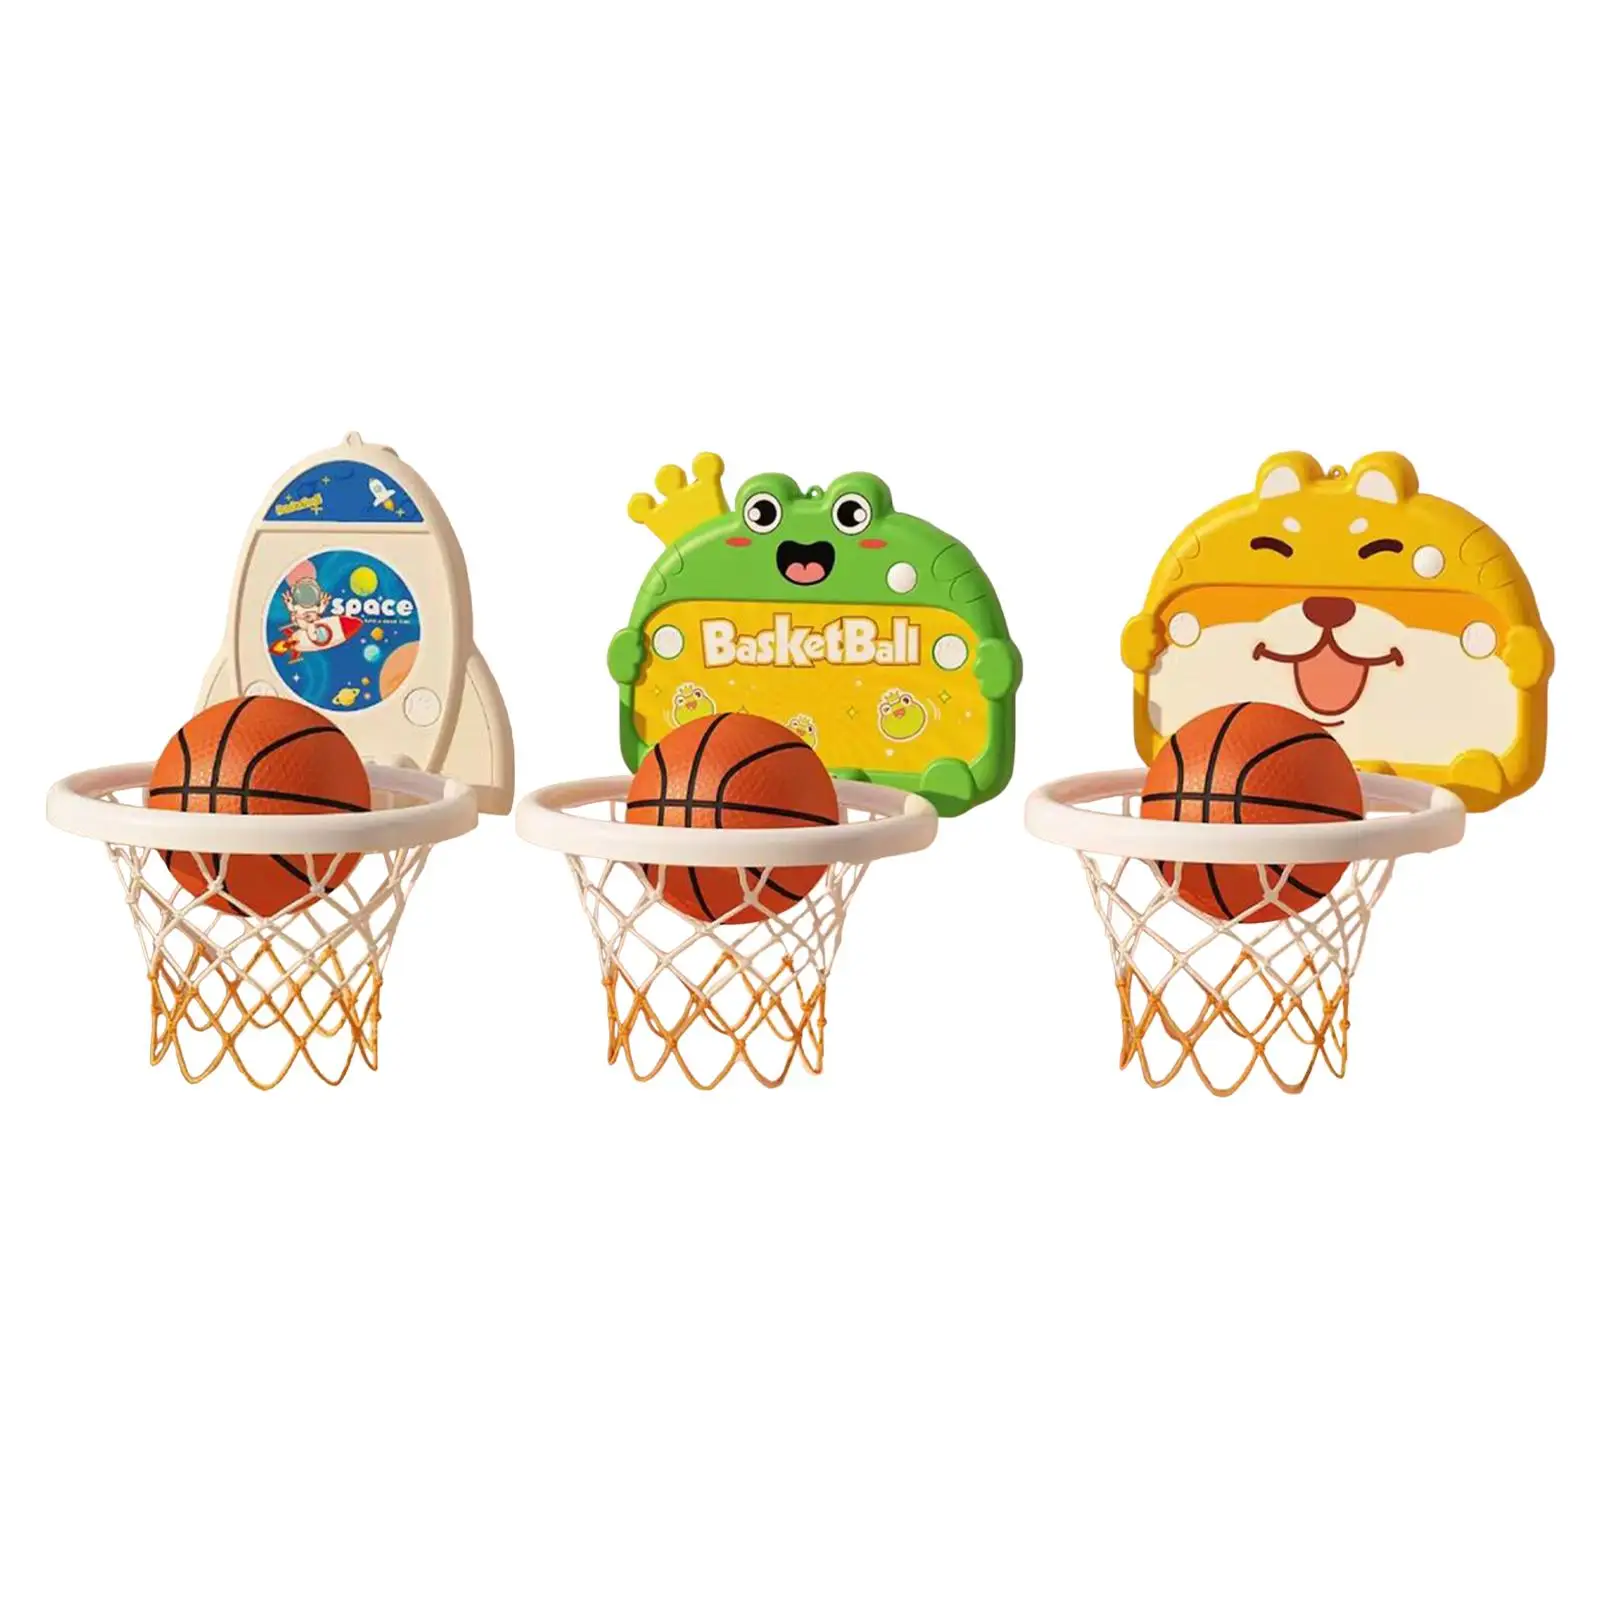 

Mini Basketball Hoop Set Portable Activity Centers Interactive with Basketball for Holiday Gifts Bedroom Indoor Wall Living Room